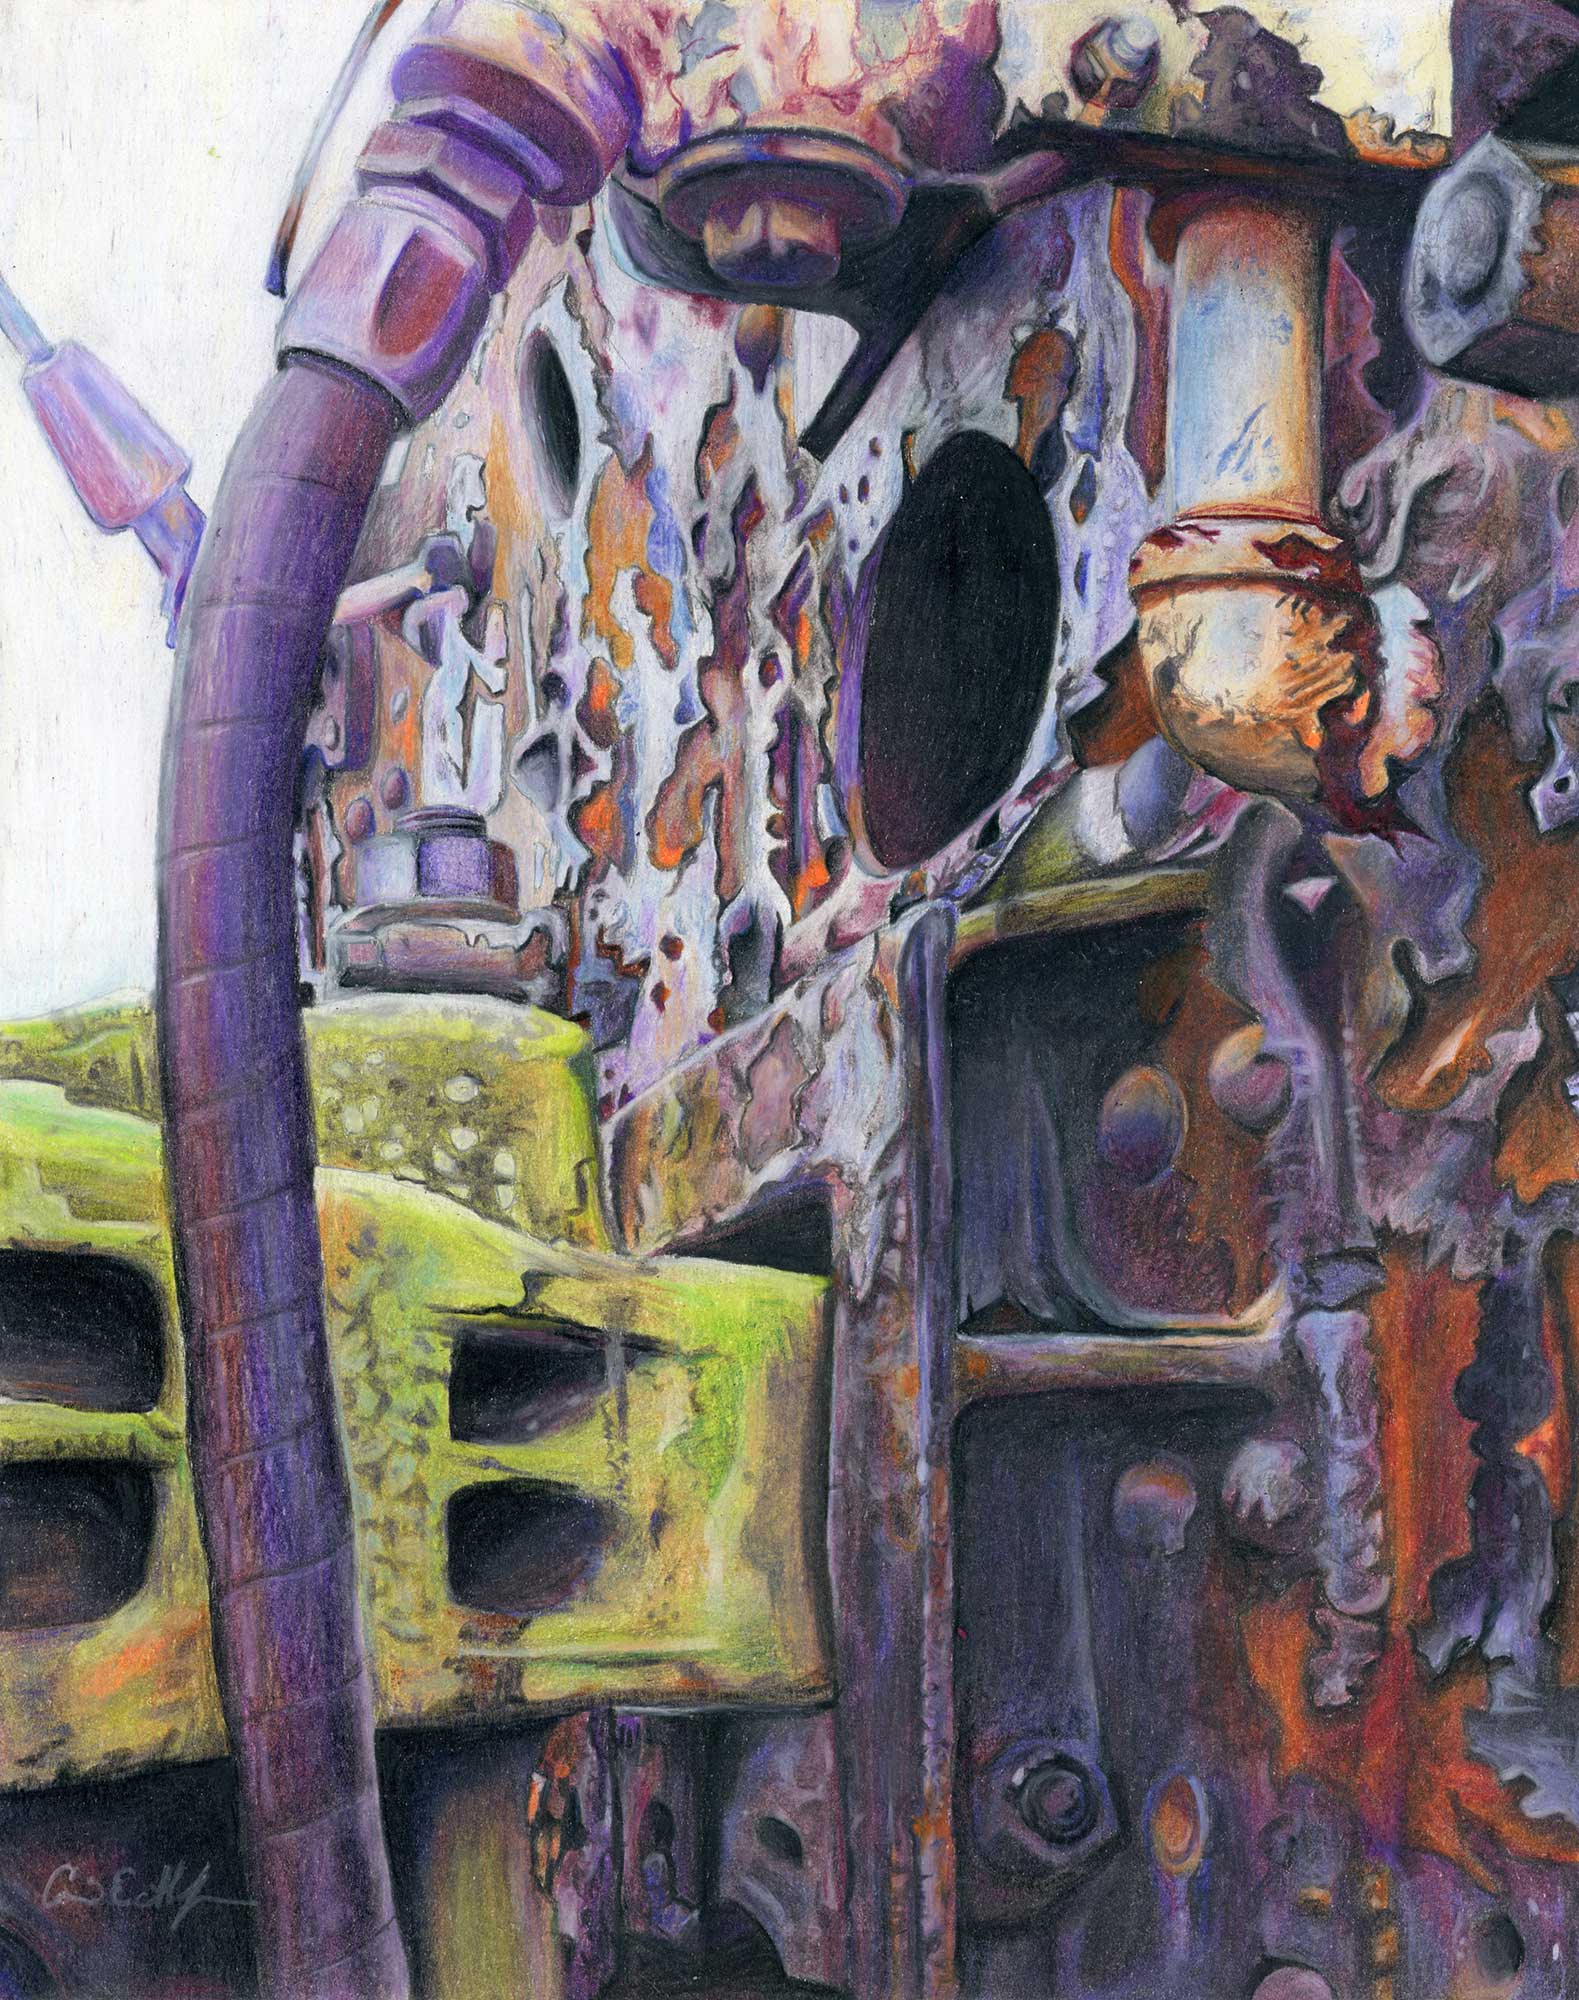 SOLD - "Weathered Traveler", 11" x 14", colored pencil